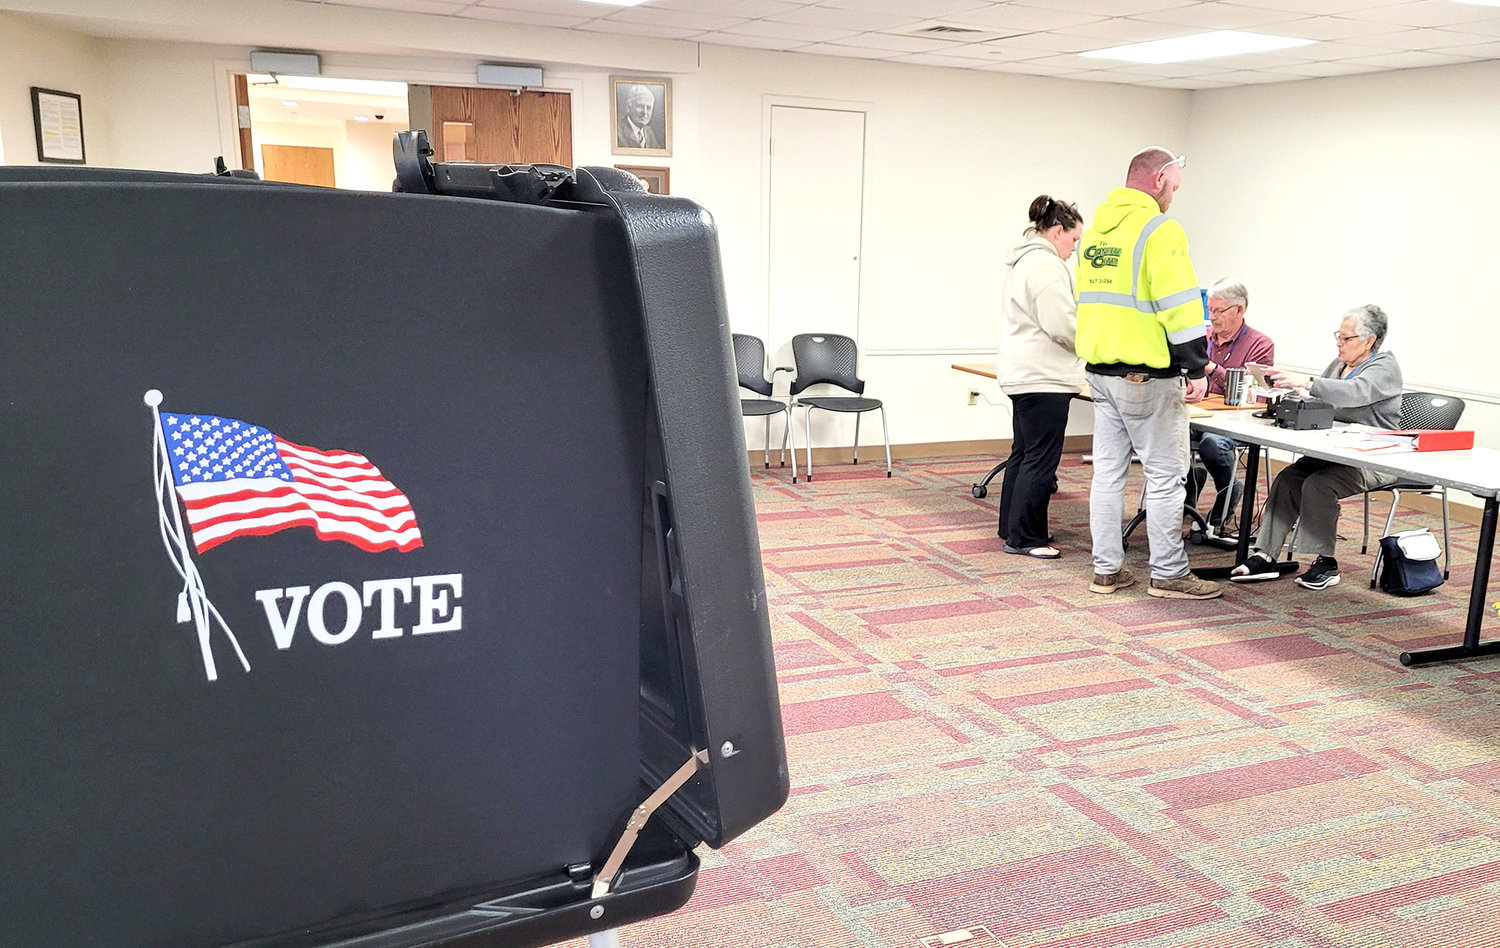 Voters register at the Fort Madison Public Library at around 5:15 p.m. to vote on the Lee County Essential Services levy Tuesday in Fort Madison.